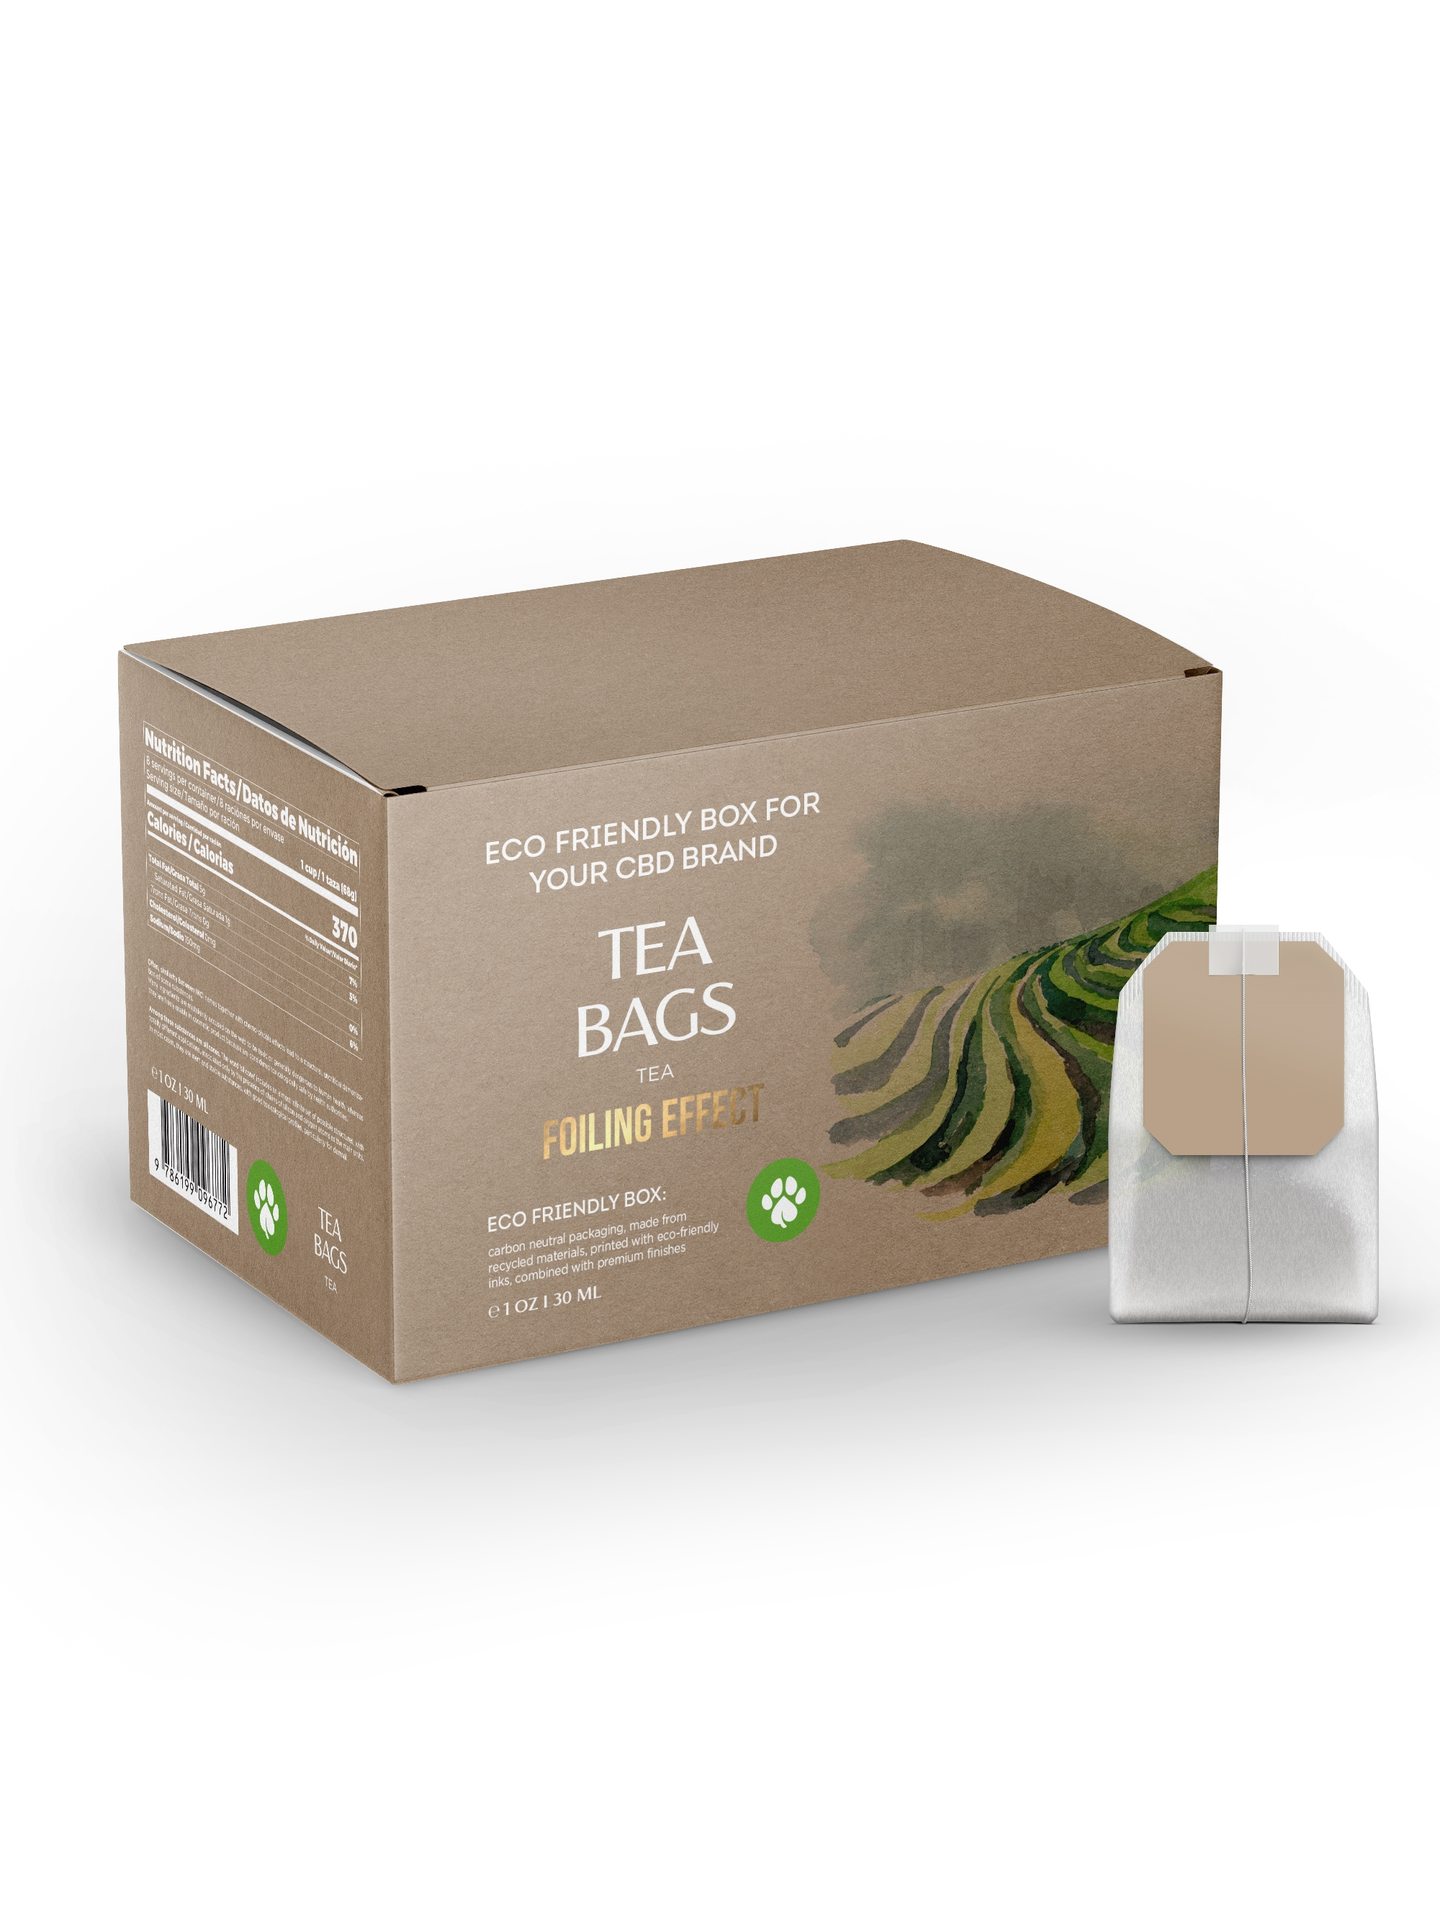 Advantages and disadvantages of various tea packaging materials